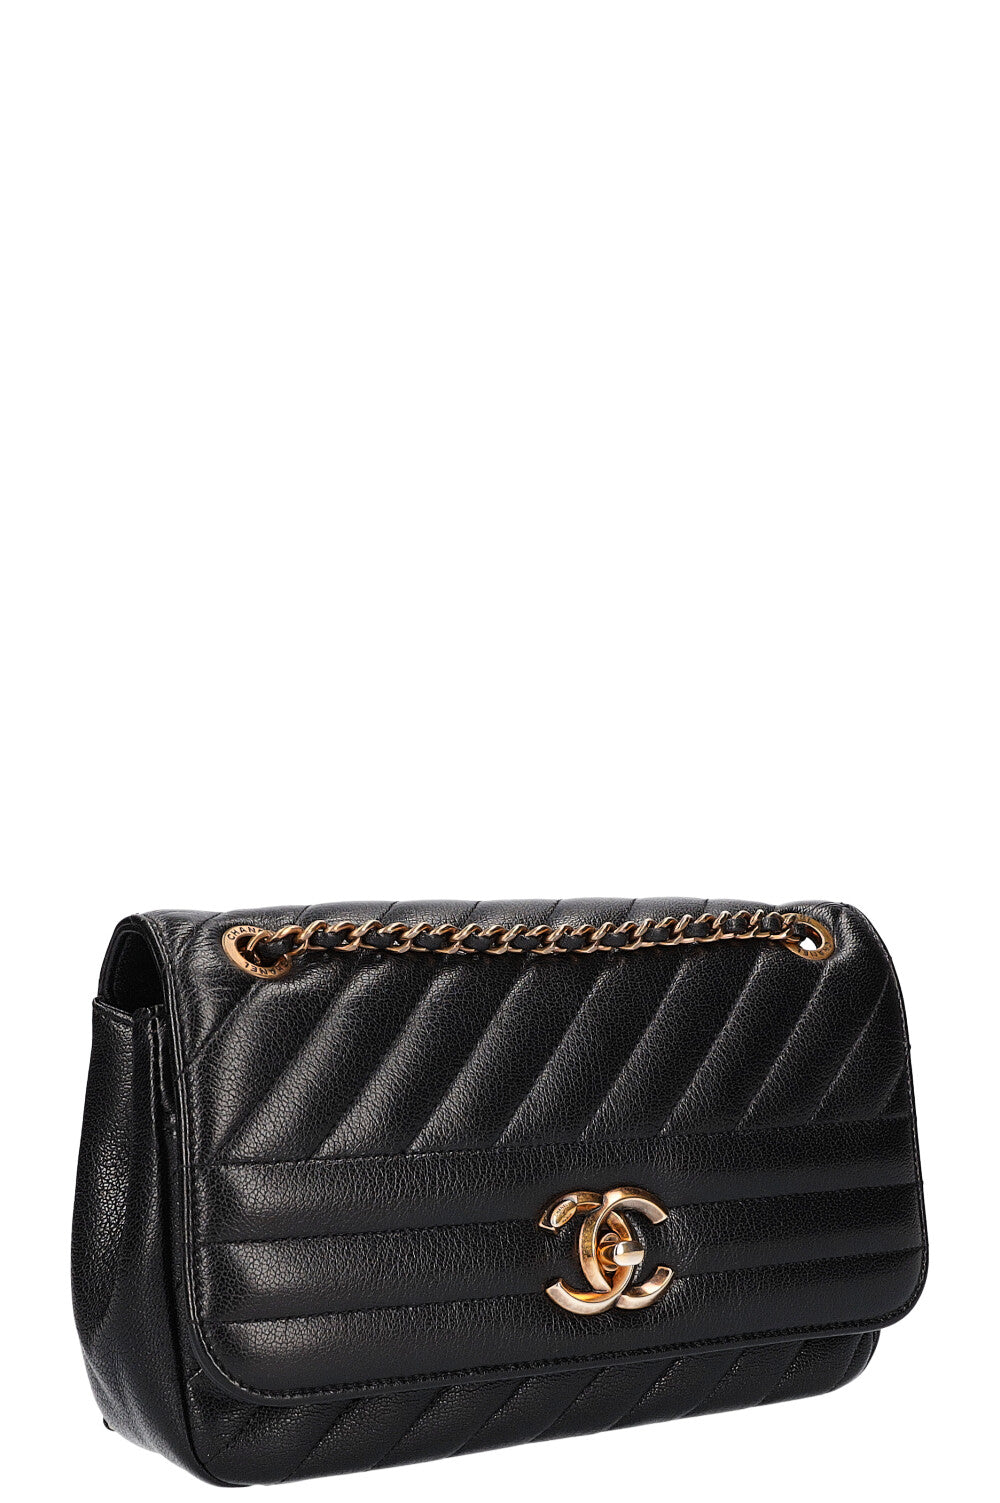 CHANEL Diagonal Quilted Single Flap Bag